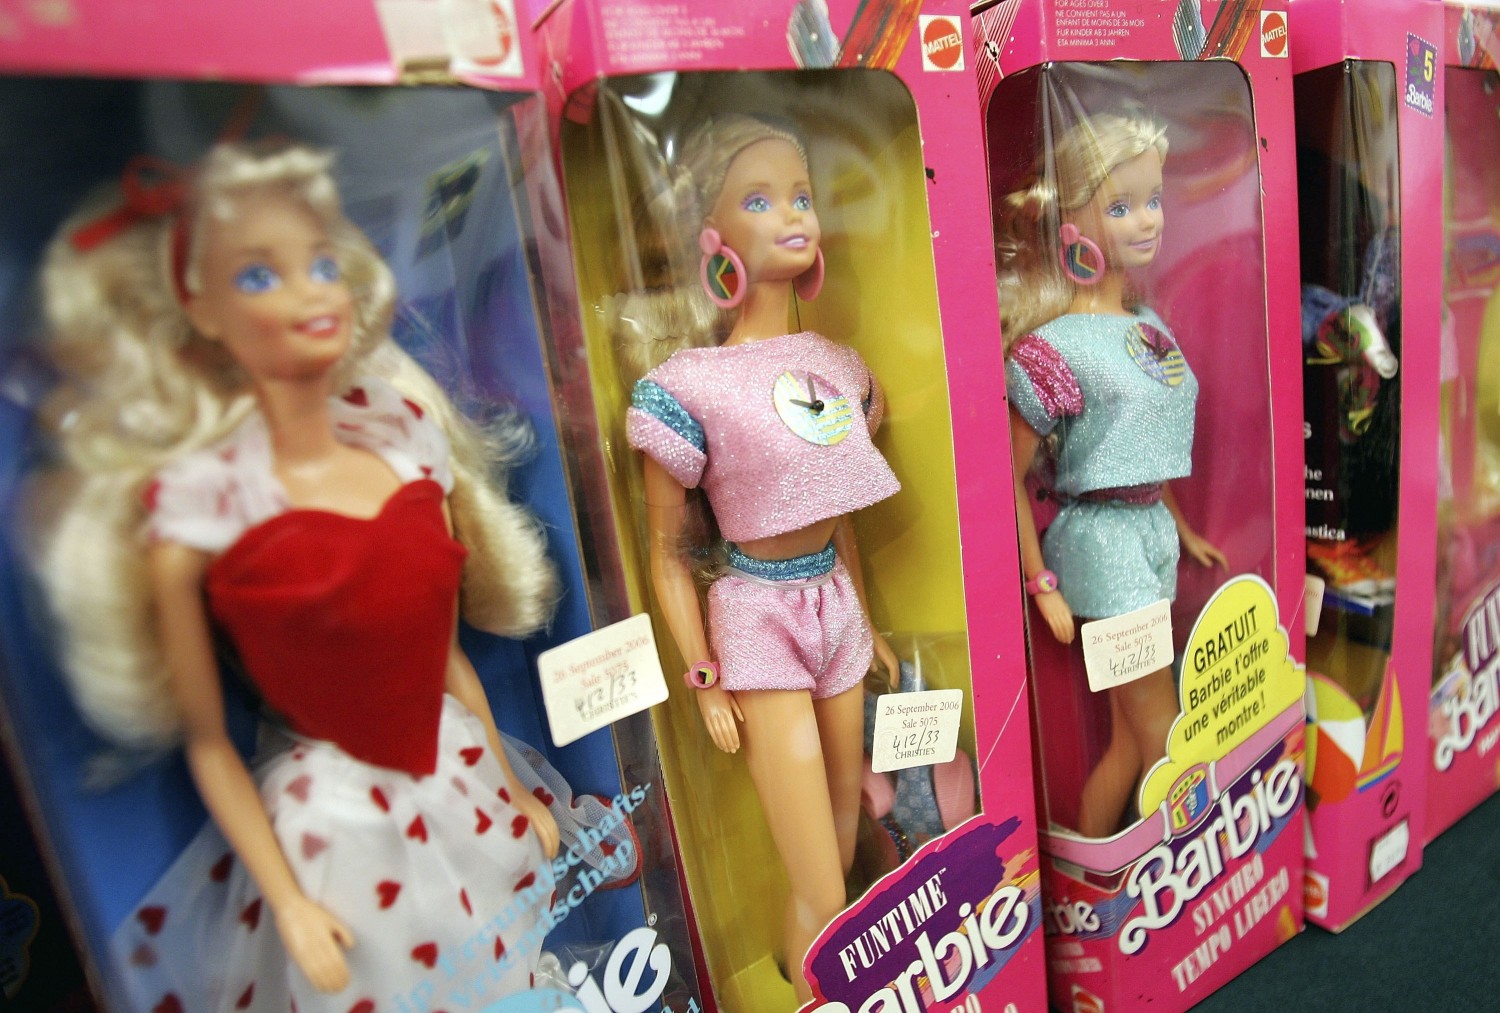 1980s holiday barbies